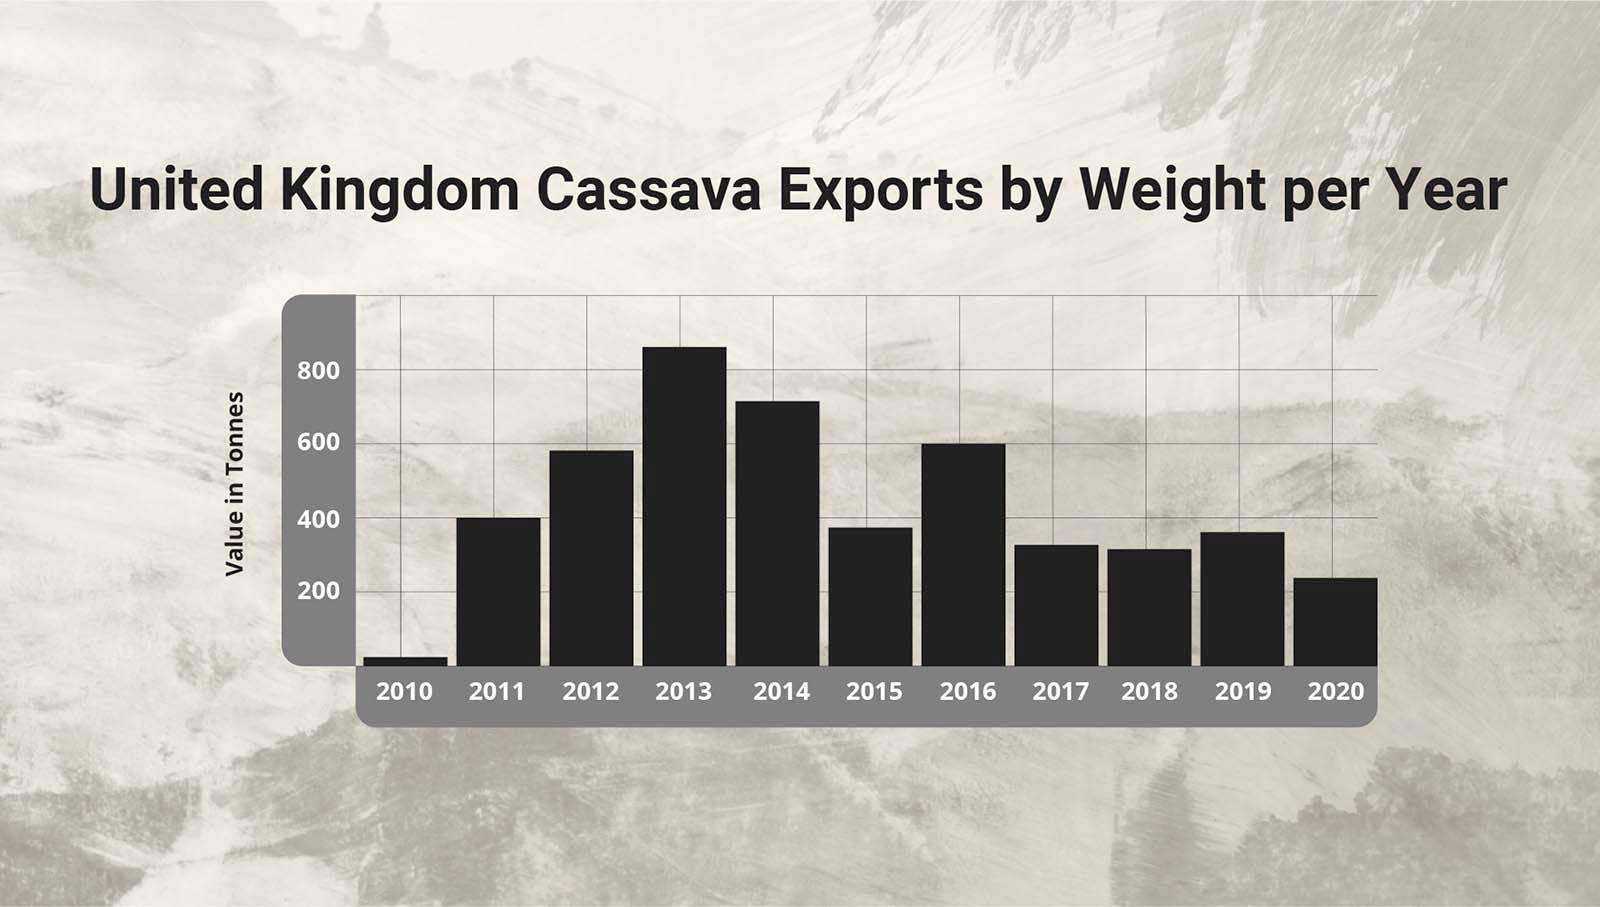 Graph 1: United Kingdom Cassava Exports by Weight per Year